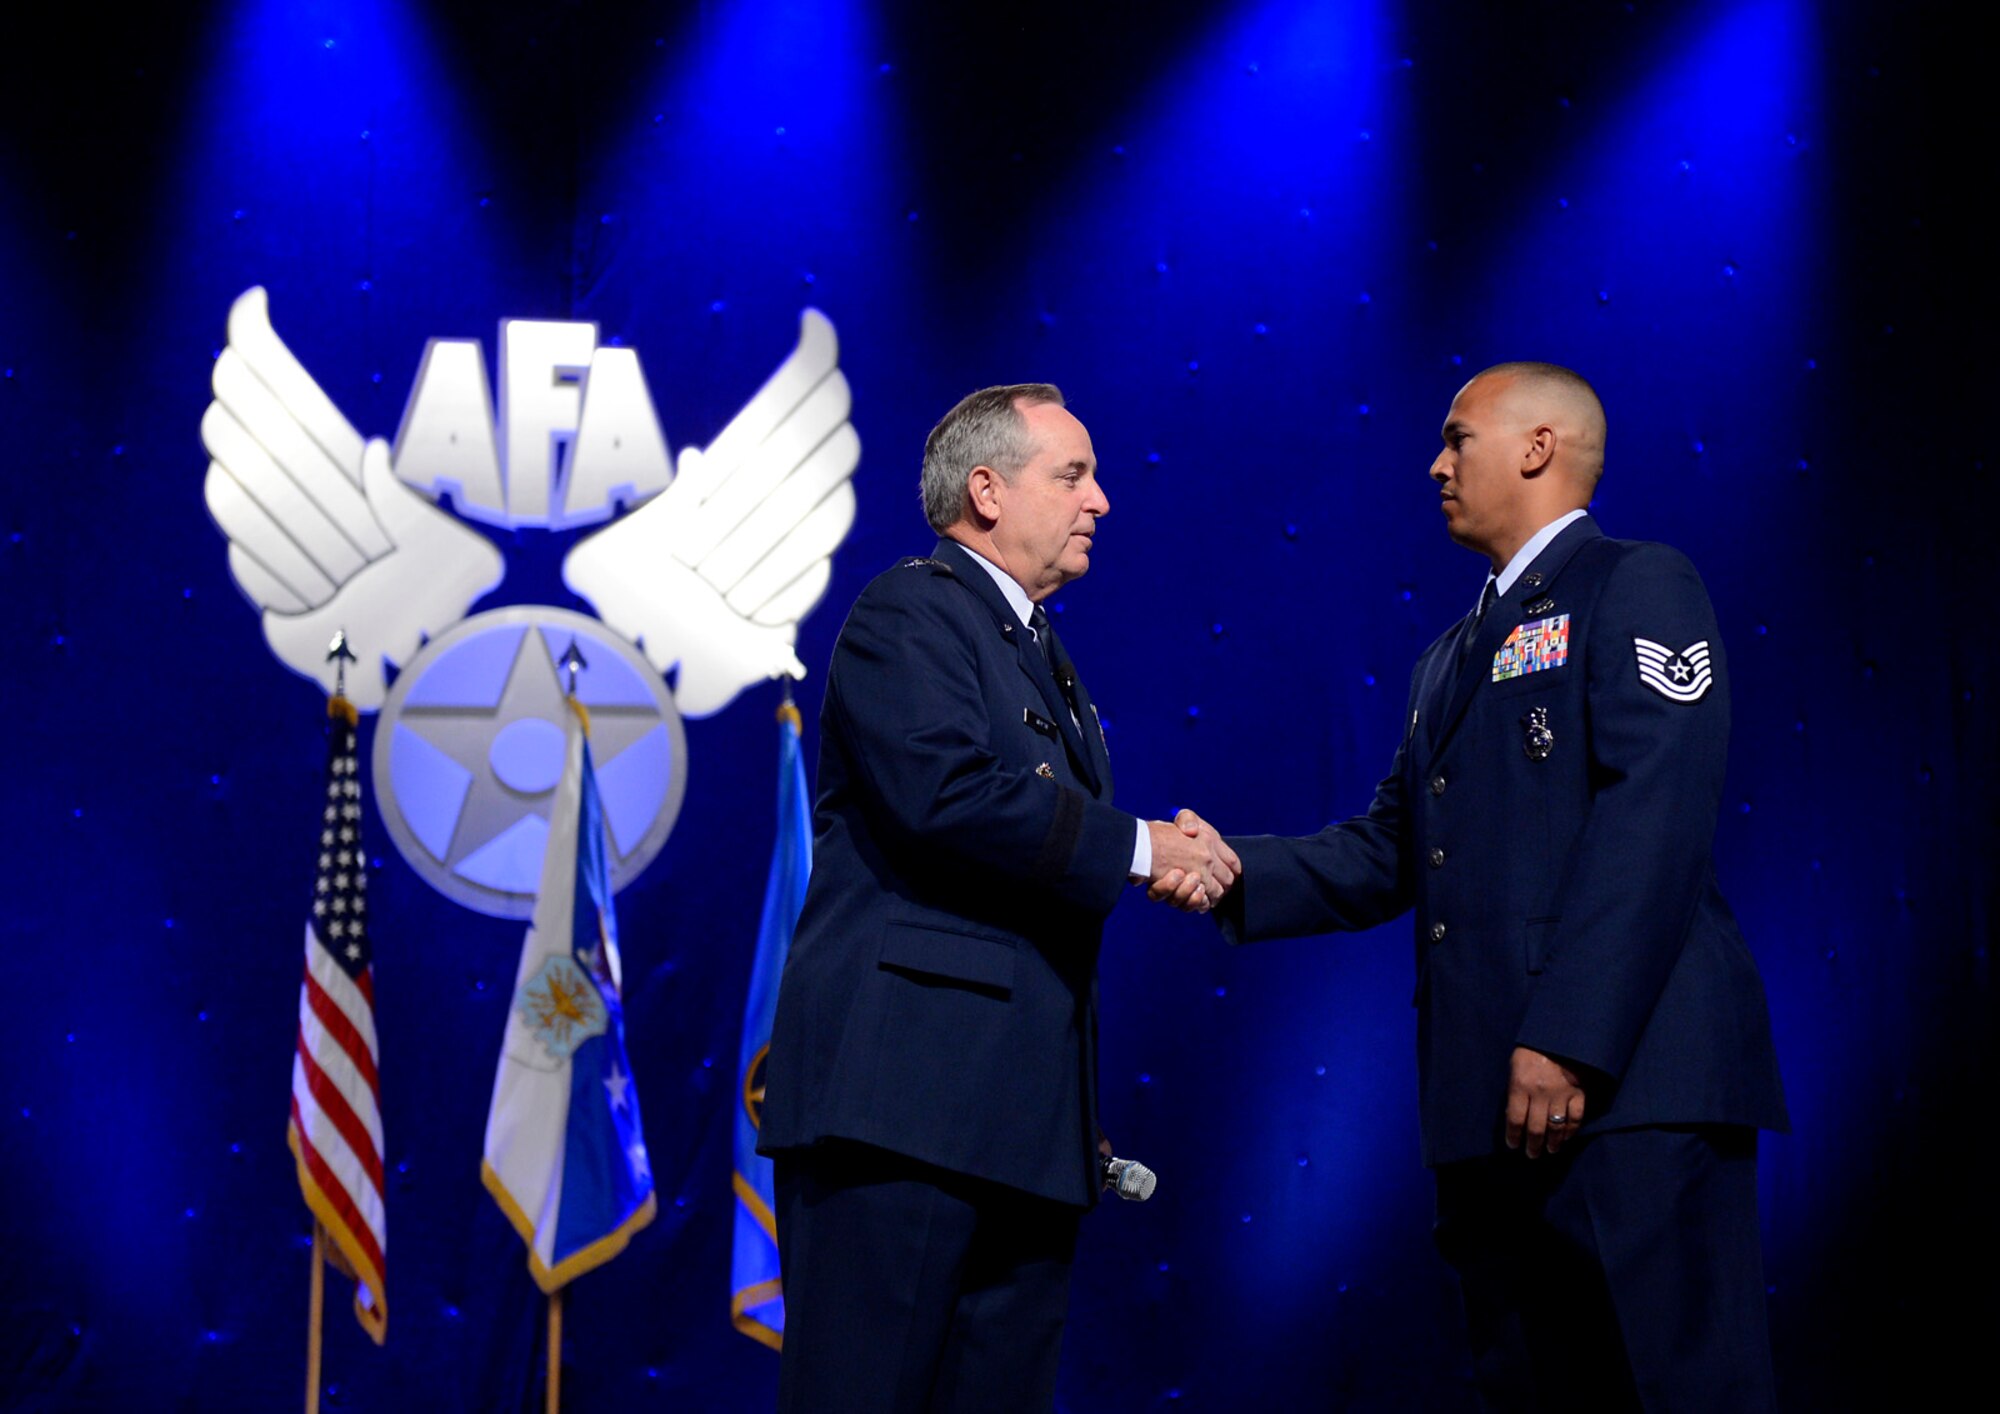 Air Force Chief of Staff Gen. Mark A. Welsh II congratulates Tech. Sgt. Brian Williams for winning the "American Airman" video contest during his keynote speech at the Air Force Association's Air & Space Conference and Technology Exposition Sept. 16, 2014, in Washington, D.C. Williams currently serves with the 87th Security Forces Squadron at Joint Base McGuire-Dix-Lakehurst, N.J., his video received 1,814 votes. (U.S. Air Force photo/Scott Ash)